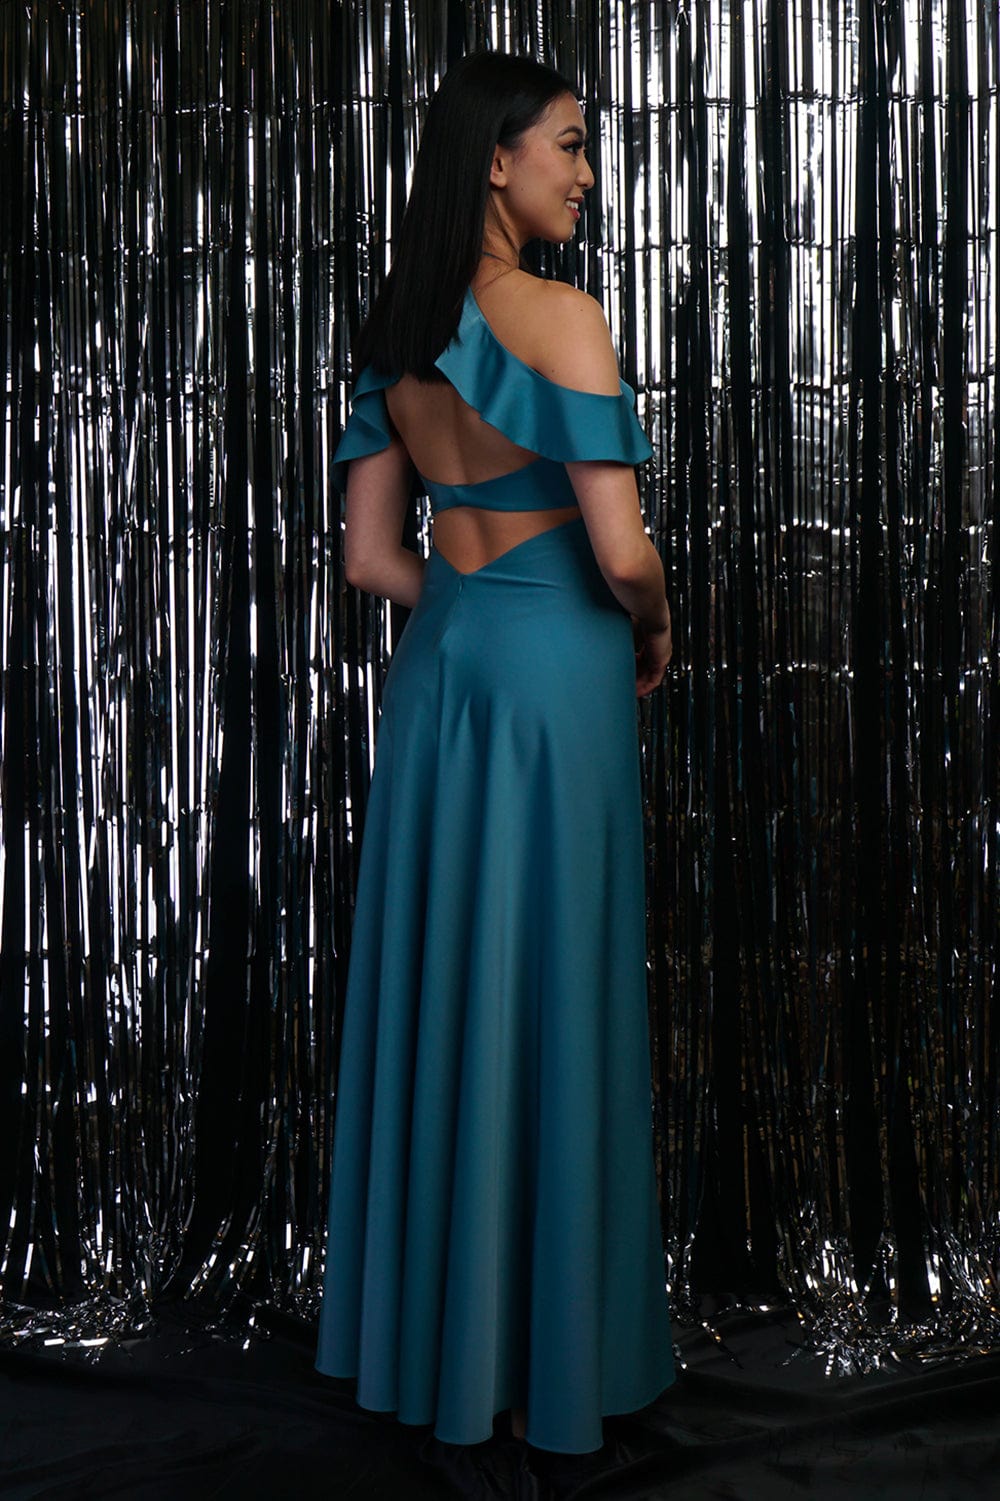 GOWNS Turquoise Off Shoulder Ruffle Kai Gown - Chloe Dao